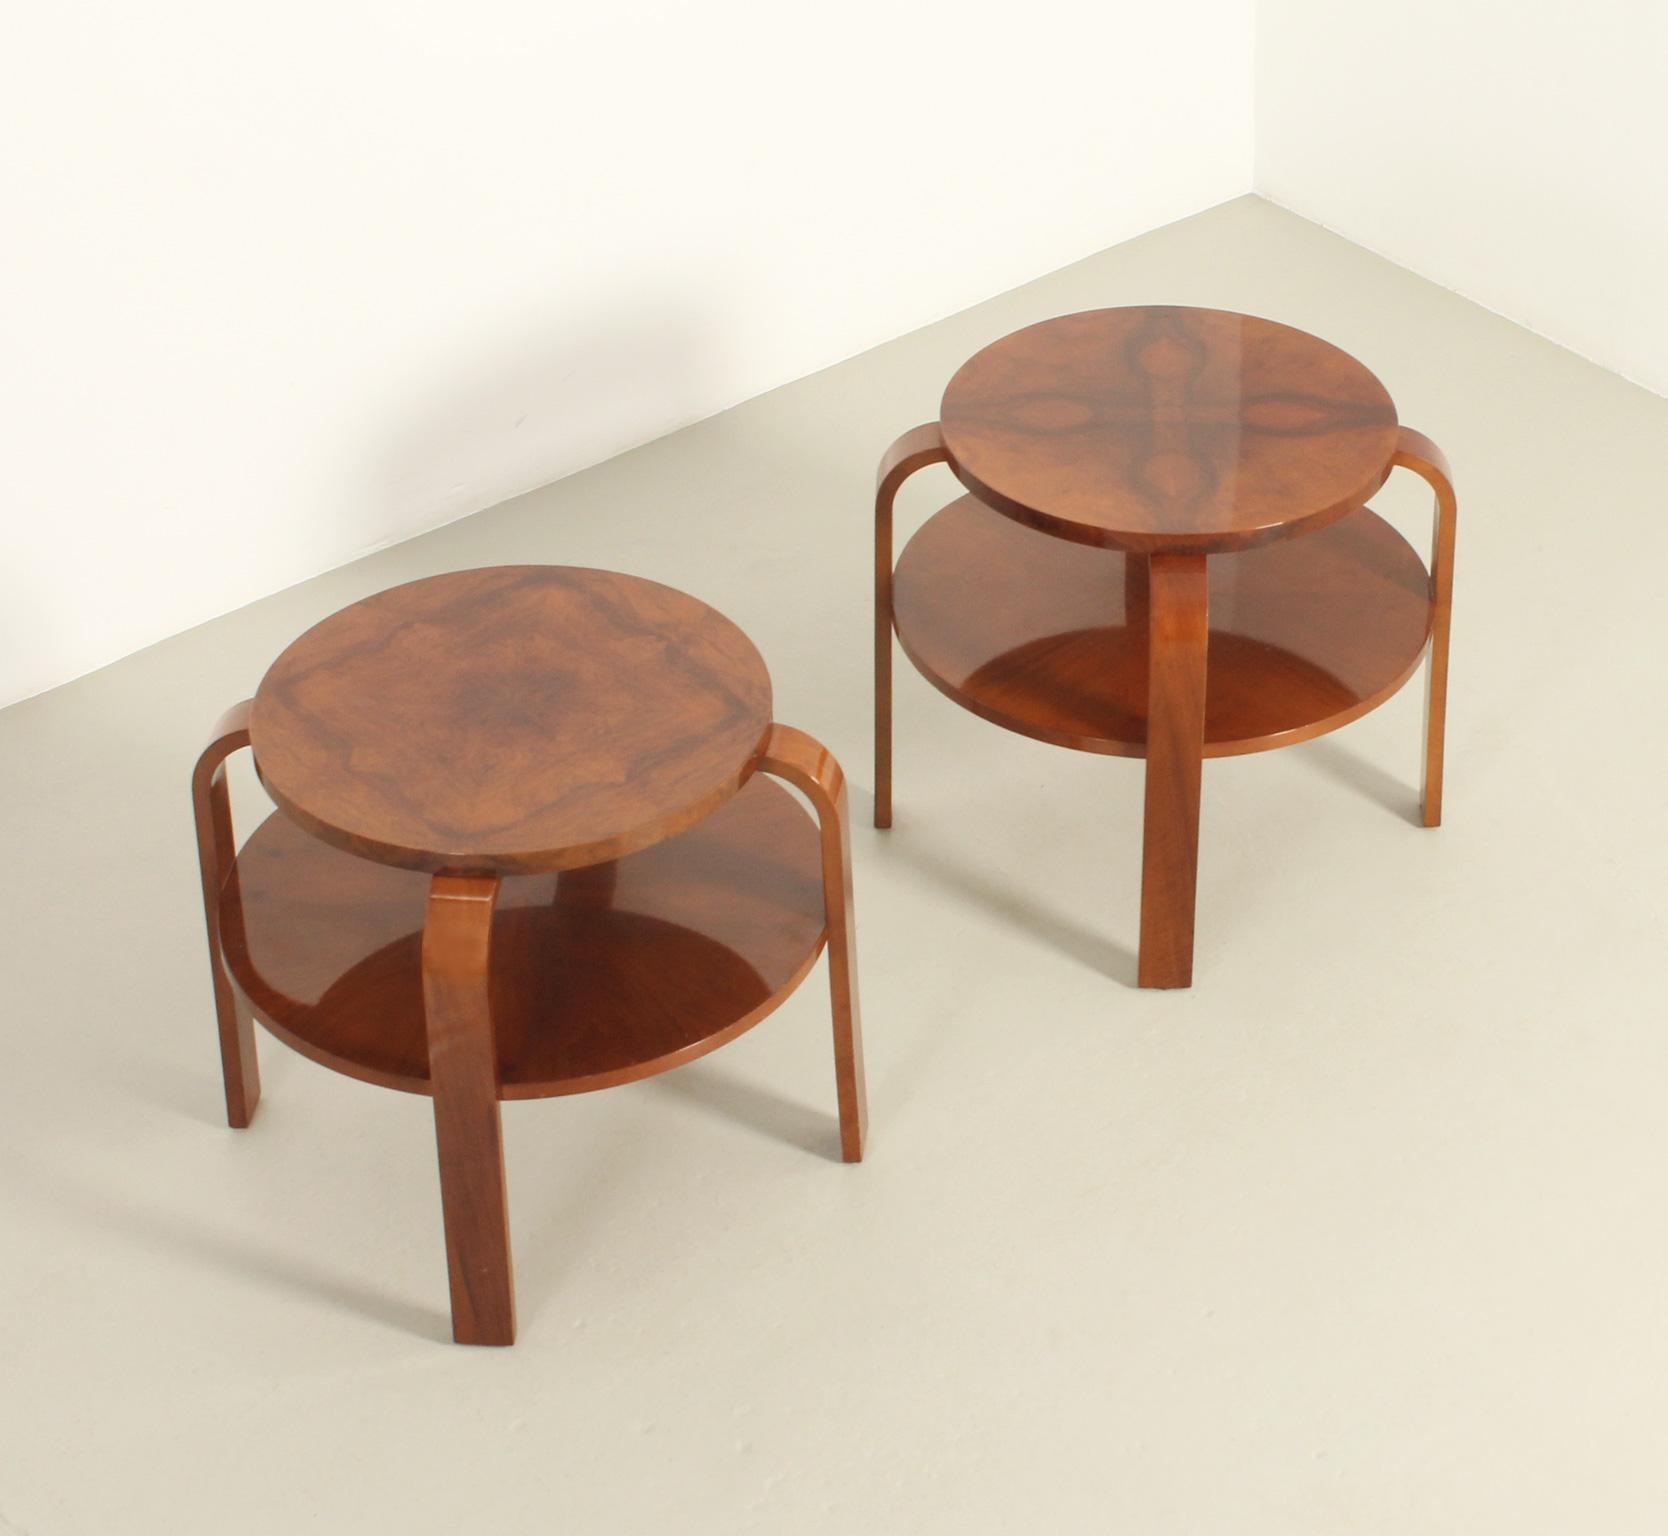 Pair of Art Deco coffee or side tables from 1930s, Spain. Walnut veneered wood with glossy varnish finish. Tops with different pattern veneer and lower tier shelf.